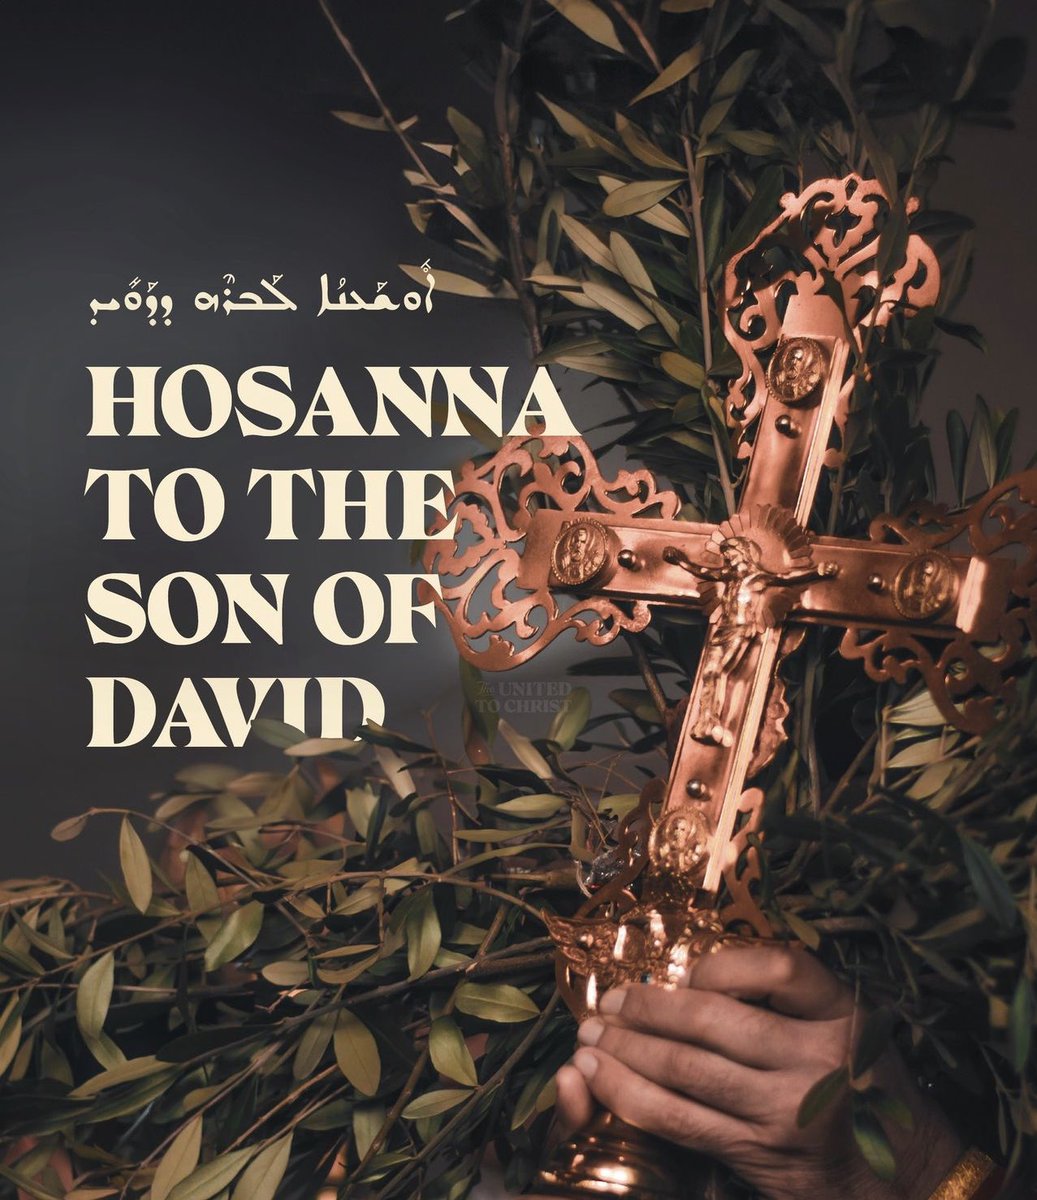 Hosanna in the highest, blessed is he who comes in the name of the Lord